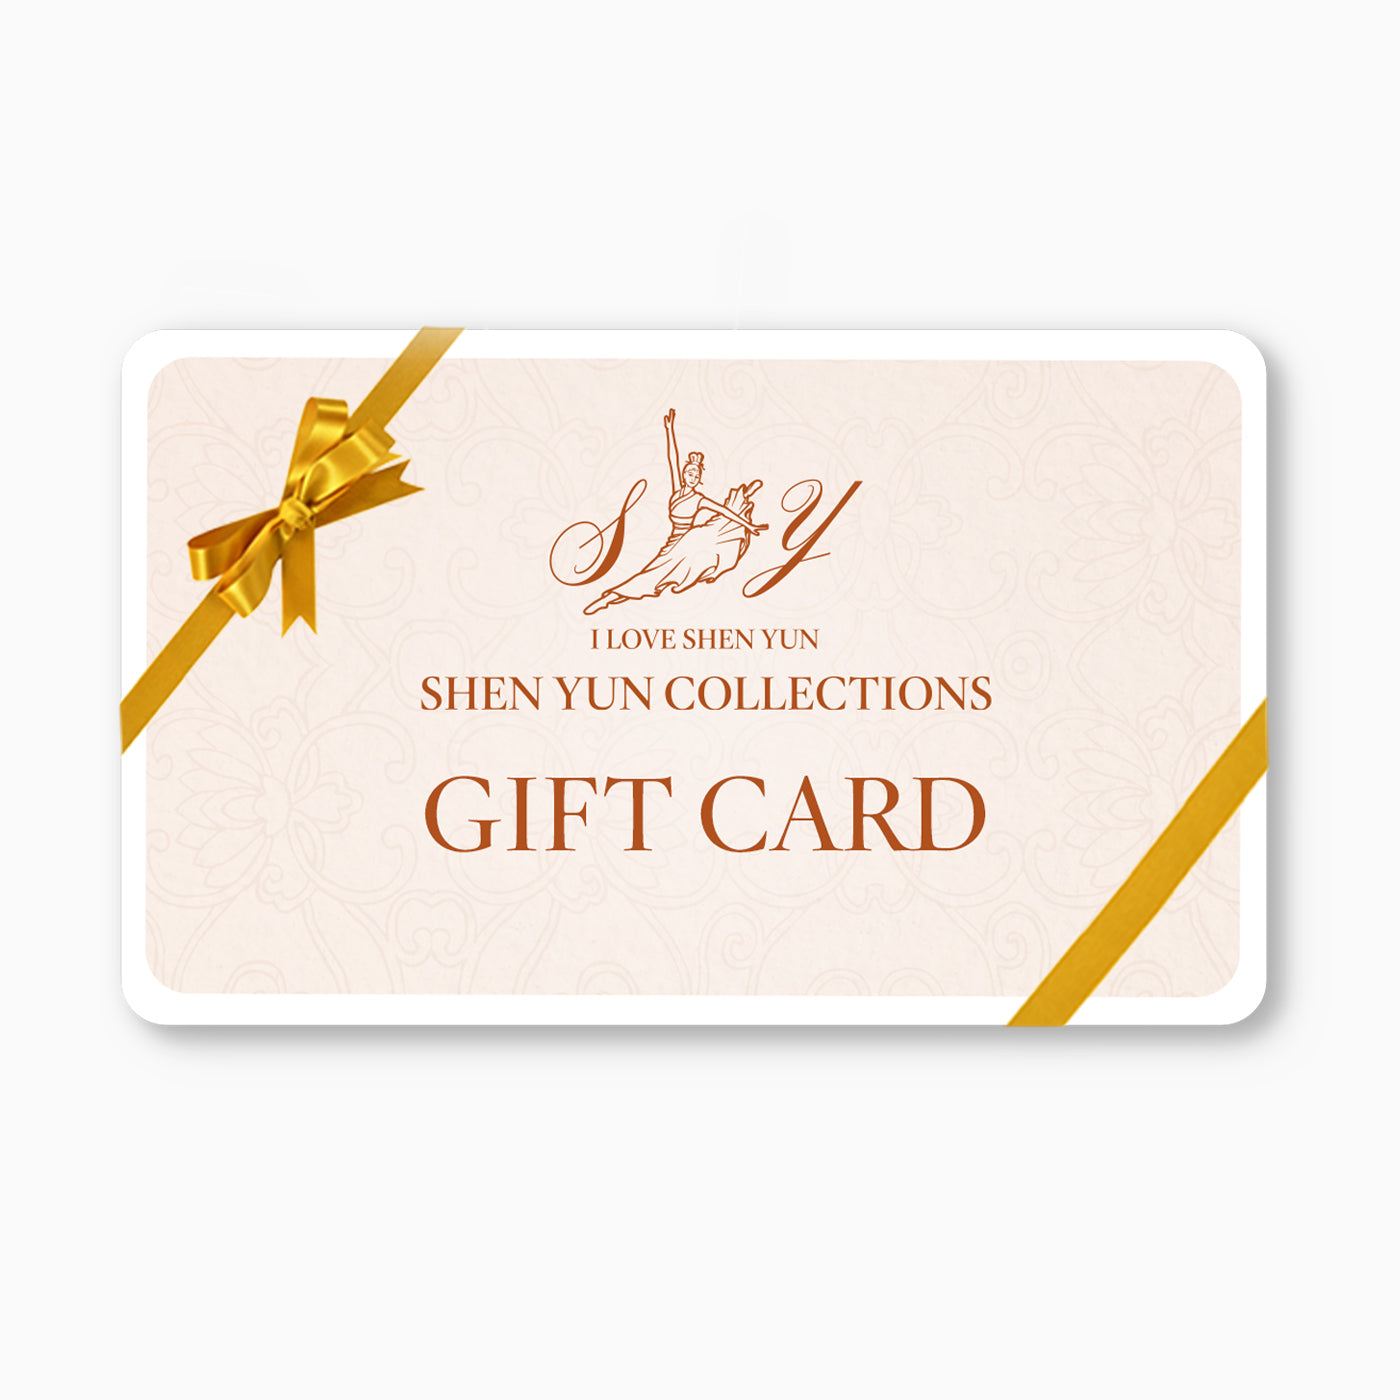 Shen Yun Collections Gift Card